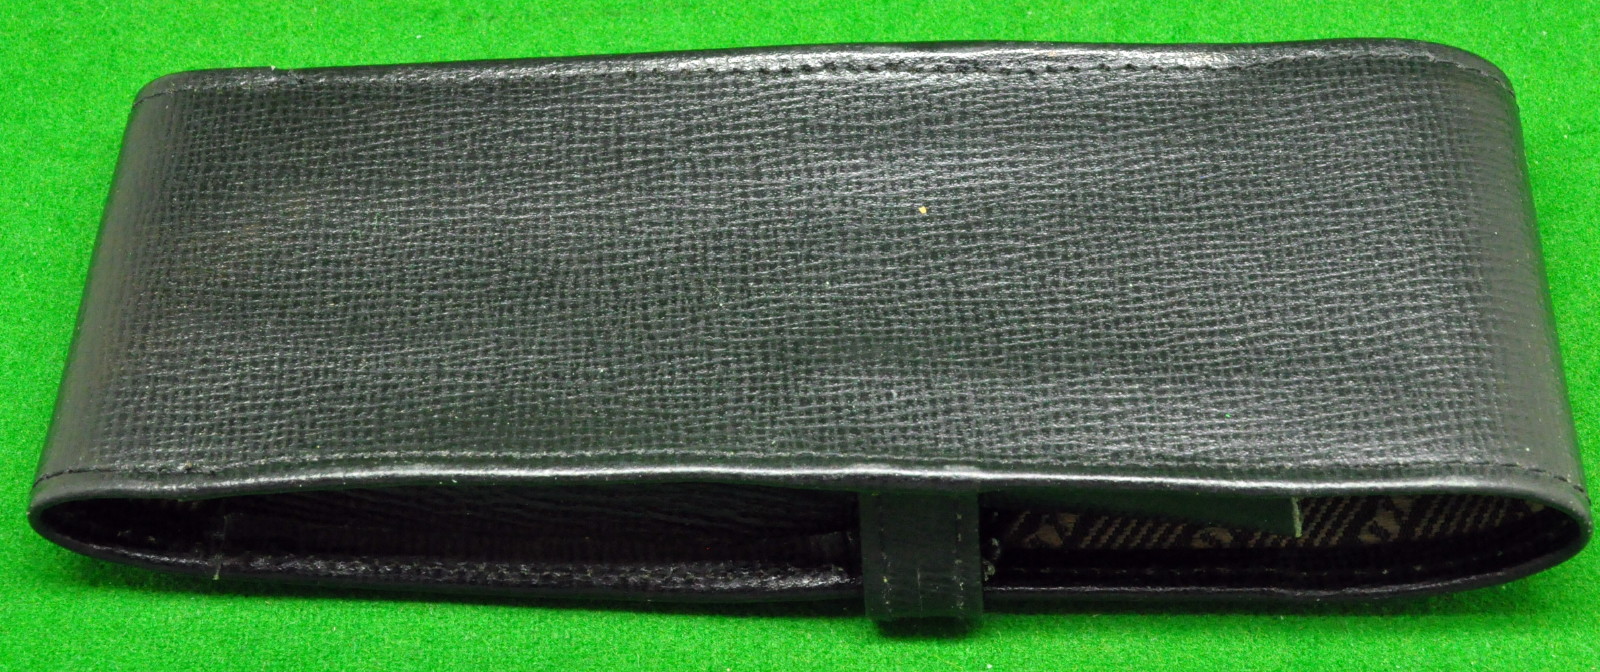 Pen Cases – Storing your collection | HERITAGE COLLECTABLES – FULLY ...